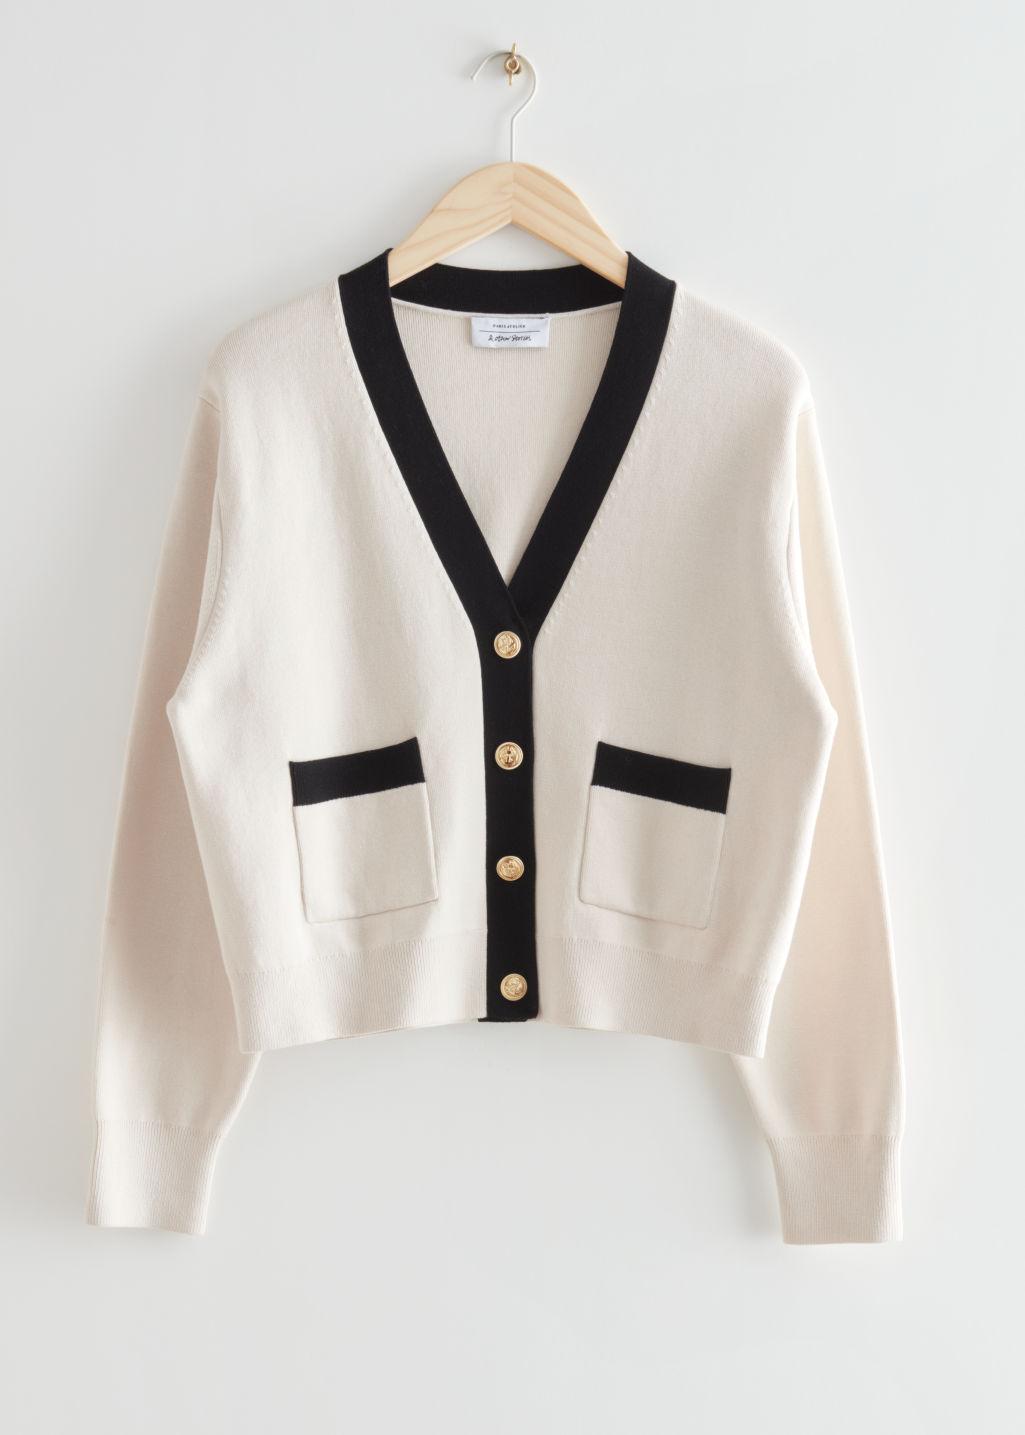 & Other Stories Cropped Gold Button Cardigan in White | Lyst